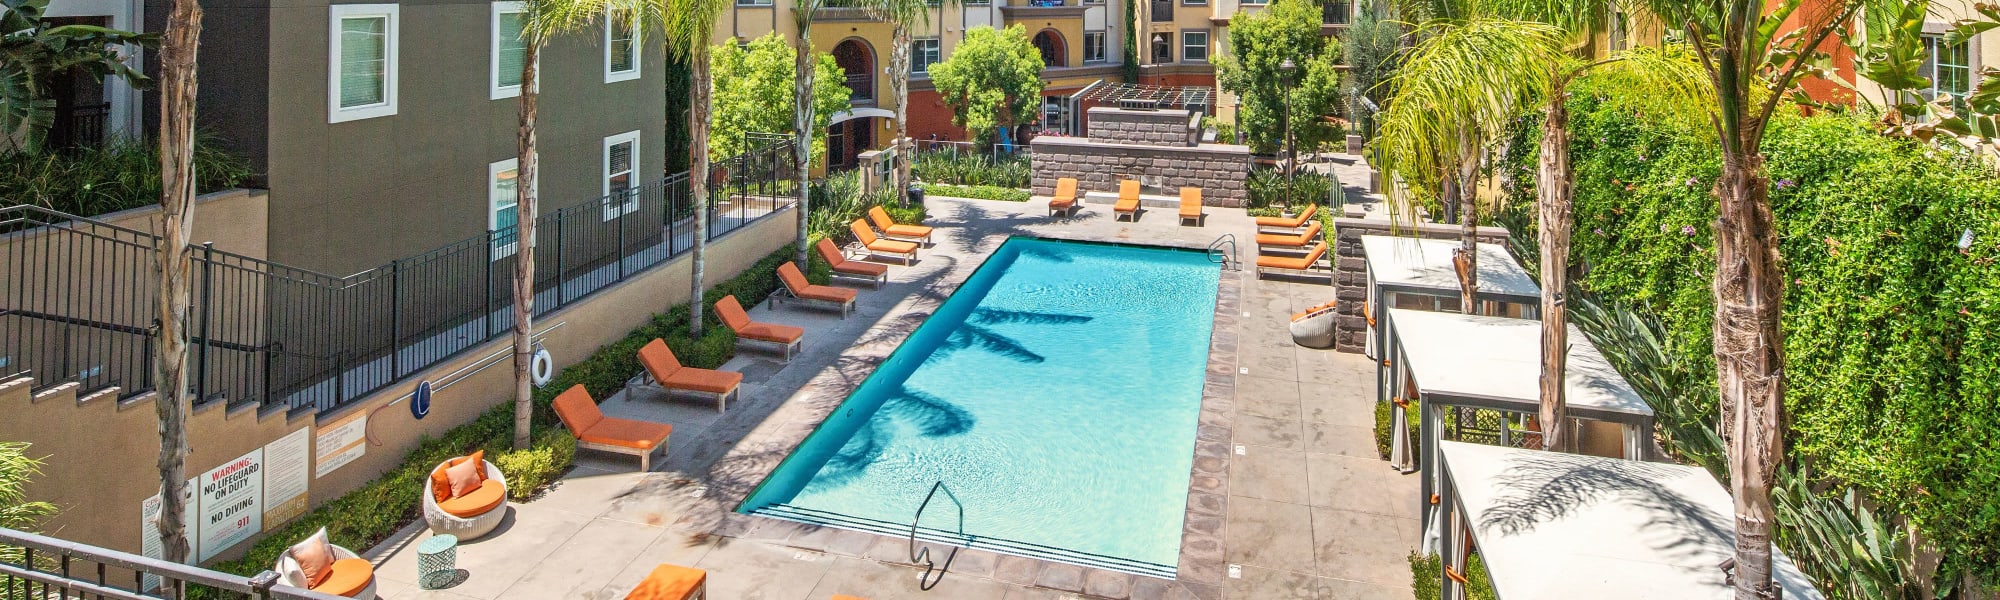 Amenities at The Boulevard Apartment Homes in Woodland Hills, California